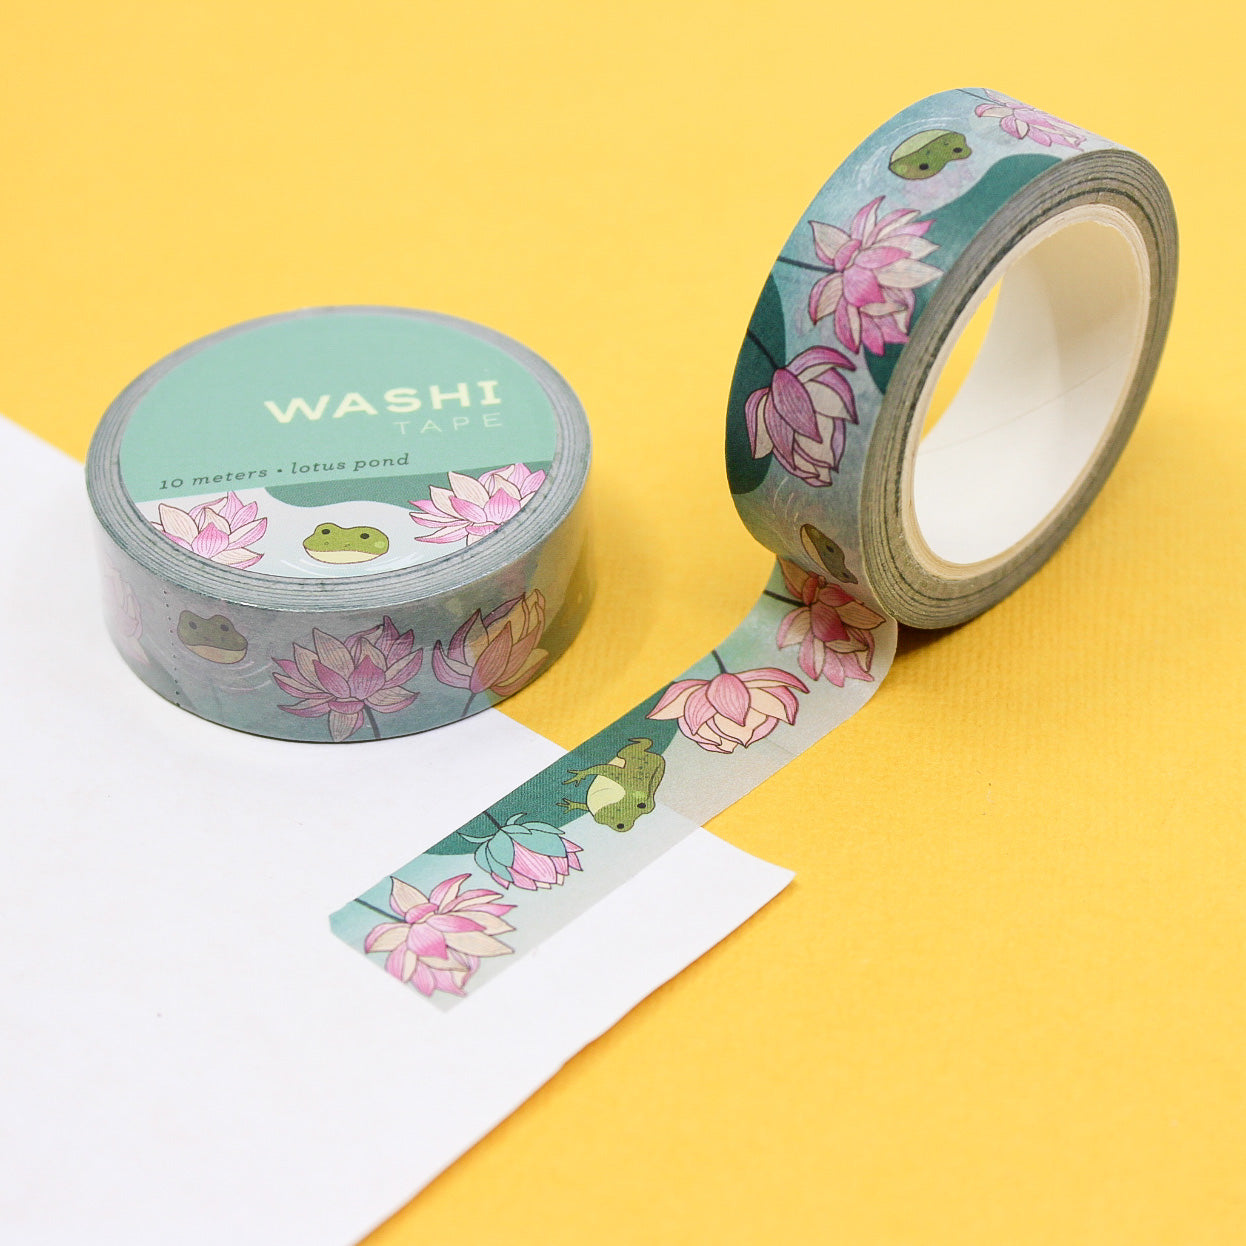 Lotus Flower and Frog Washi Tape featuring delicate lotus flowers and playful frogs, adding a serene and whimsical touch to your crafts and projects. This tape is from Girl of All Work and sold at BBB Supplies Craft Shop.